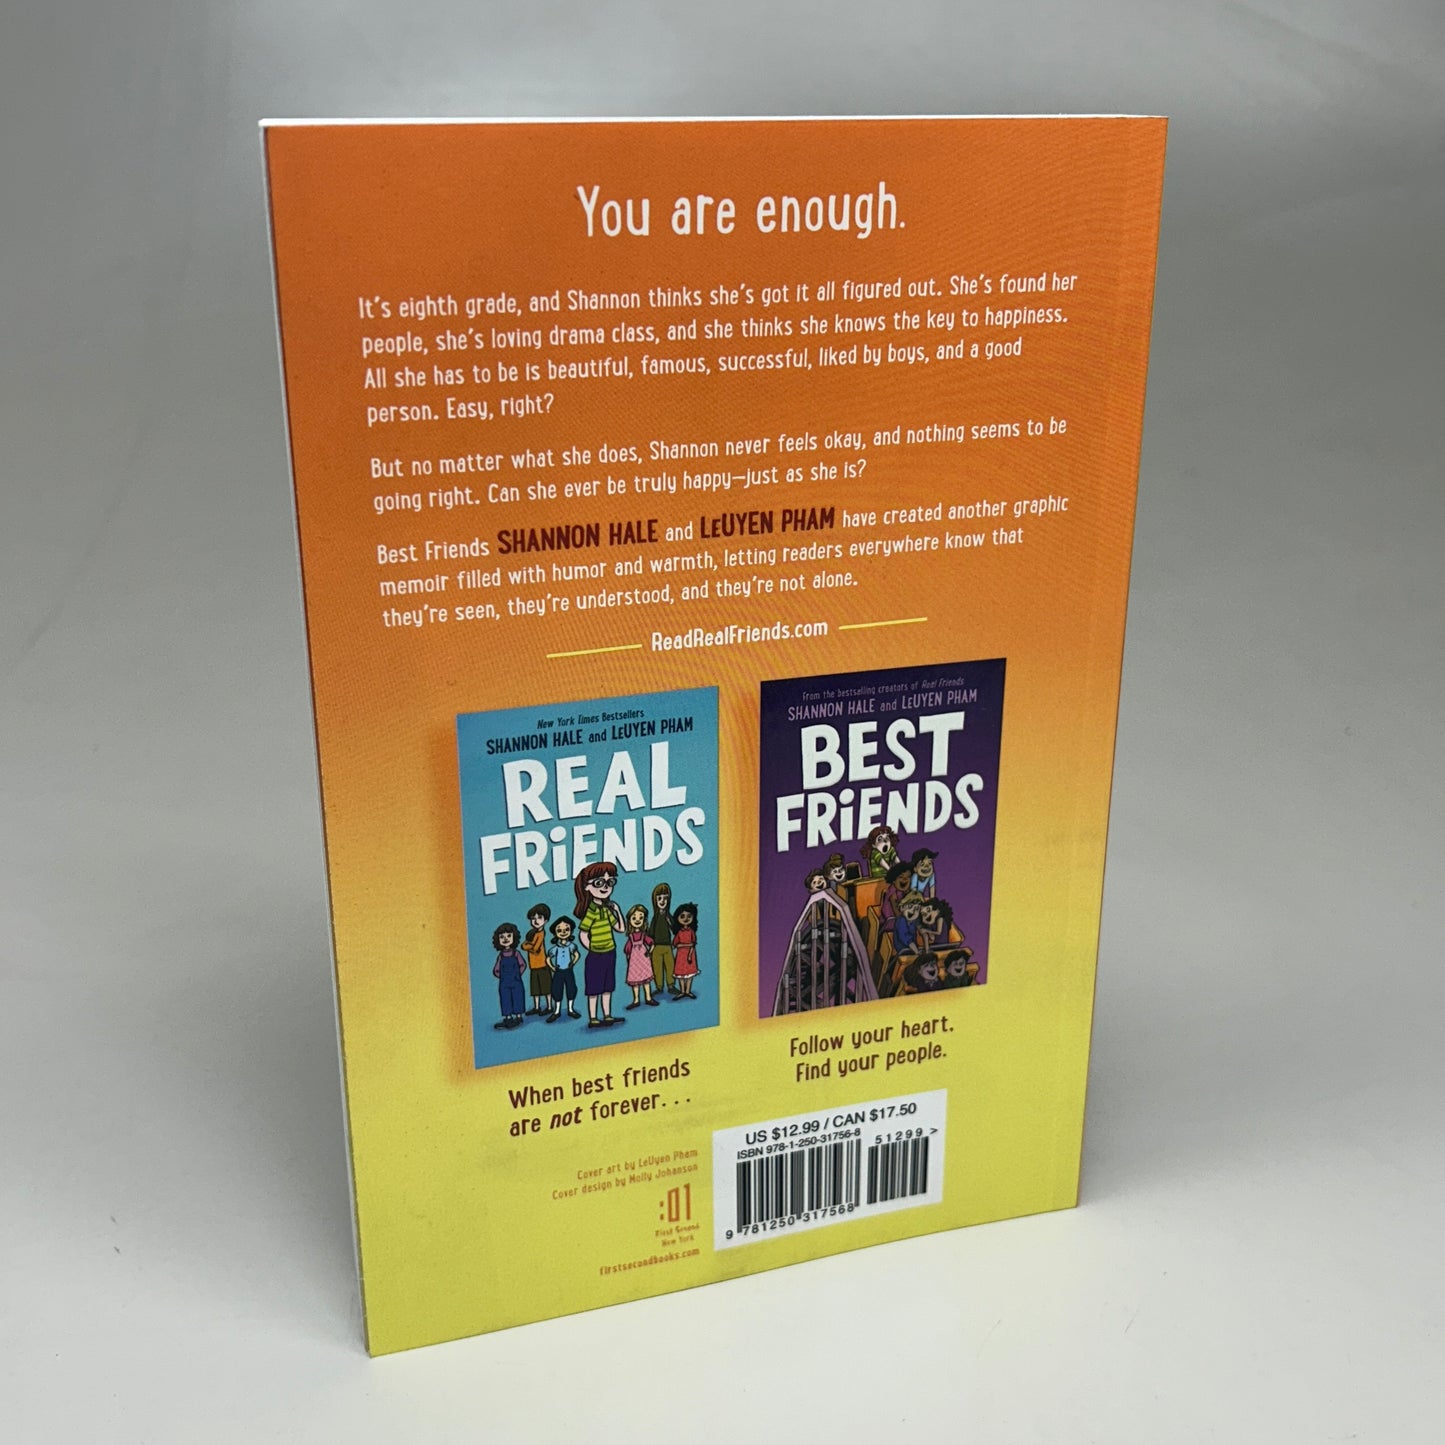 FRIENDS FOREVER By Shannon Hale and LeUyen Pham Paperback (New)